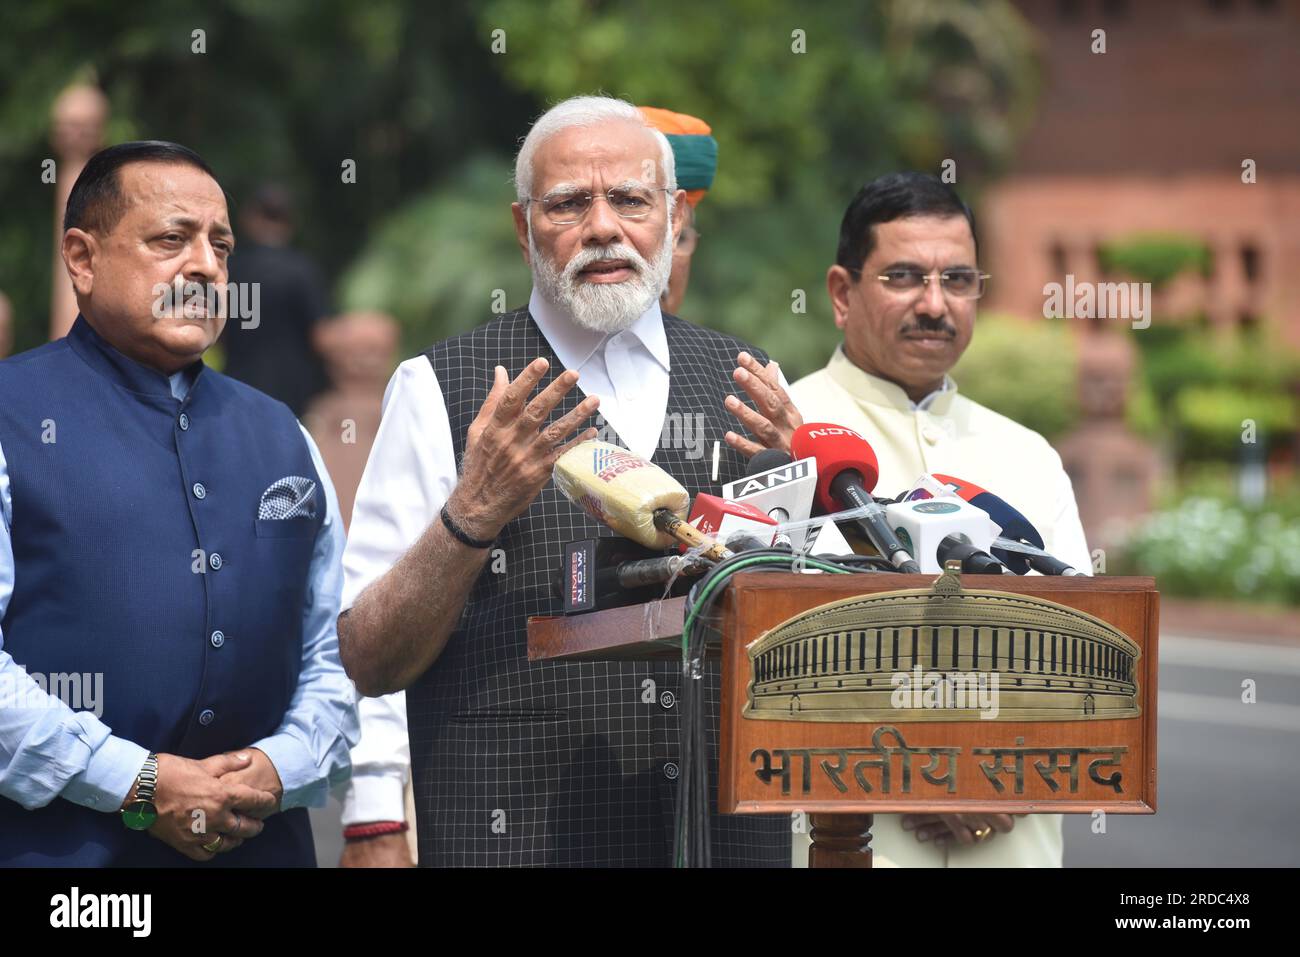 Prime Minister Narendra Modi arrives on the first day of the Indian Parliaments Monsoon Session which begins in New Delhi. The session will witness the first big faceoff between the ruling (NDA) National Democratic Alliance government and the two day old formed group of opposition parties as INDIA (Indian National Developmental Inclusive Alliance). (Photo by Sondeep Shankar/Pacific Press) Stock Photo